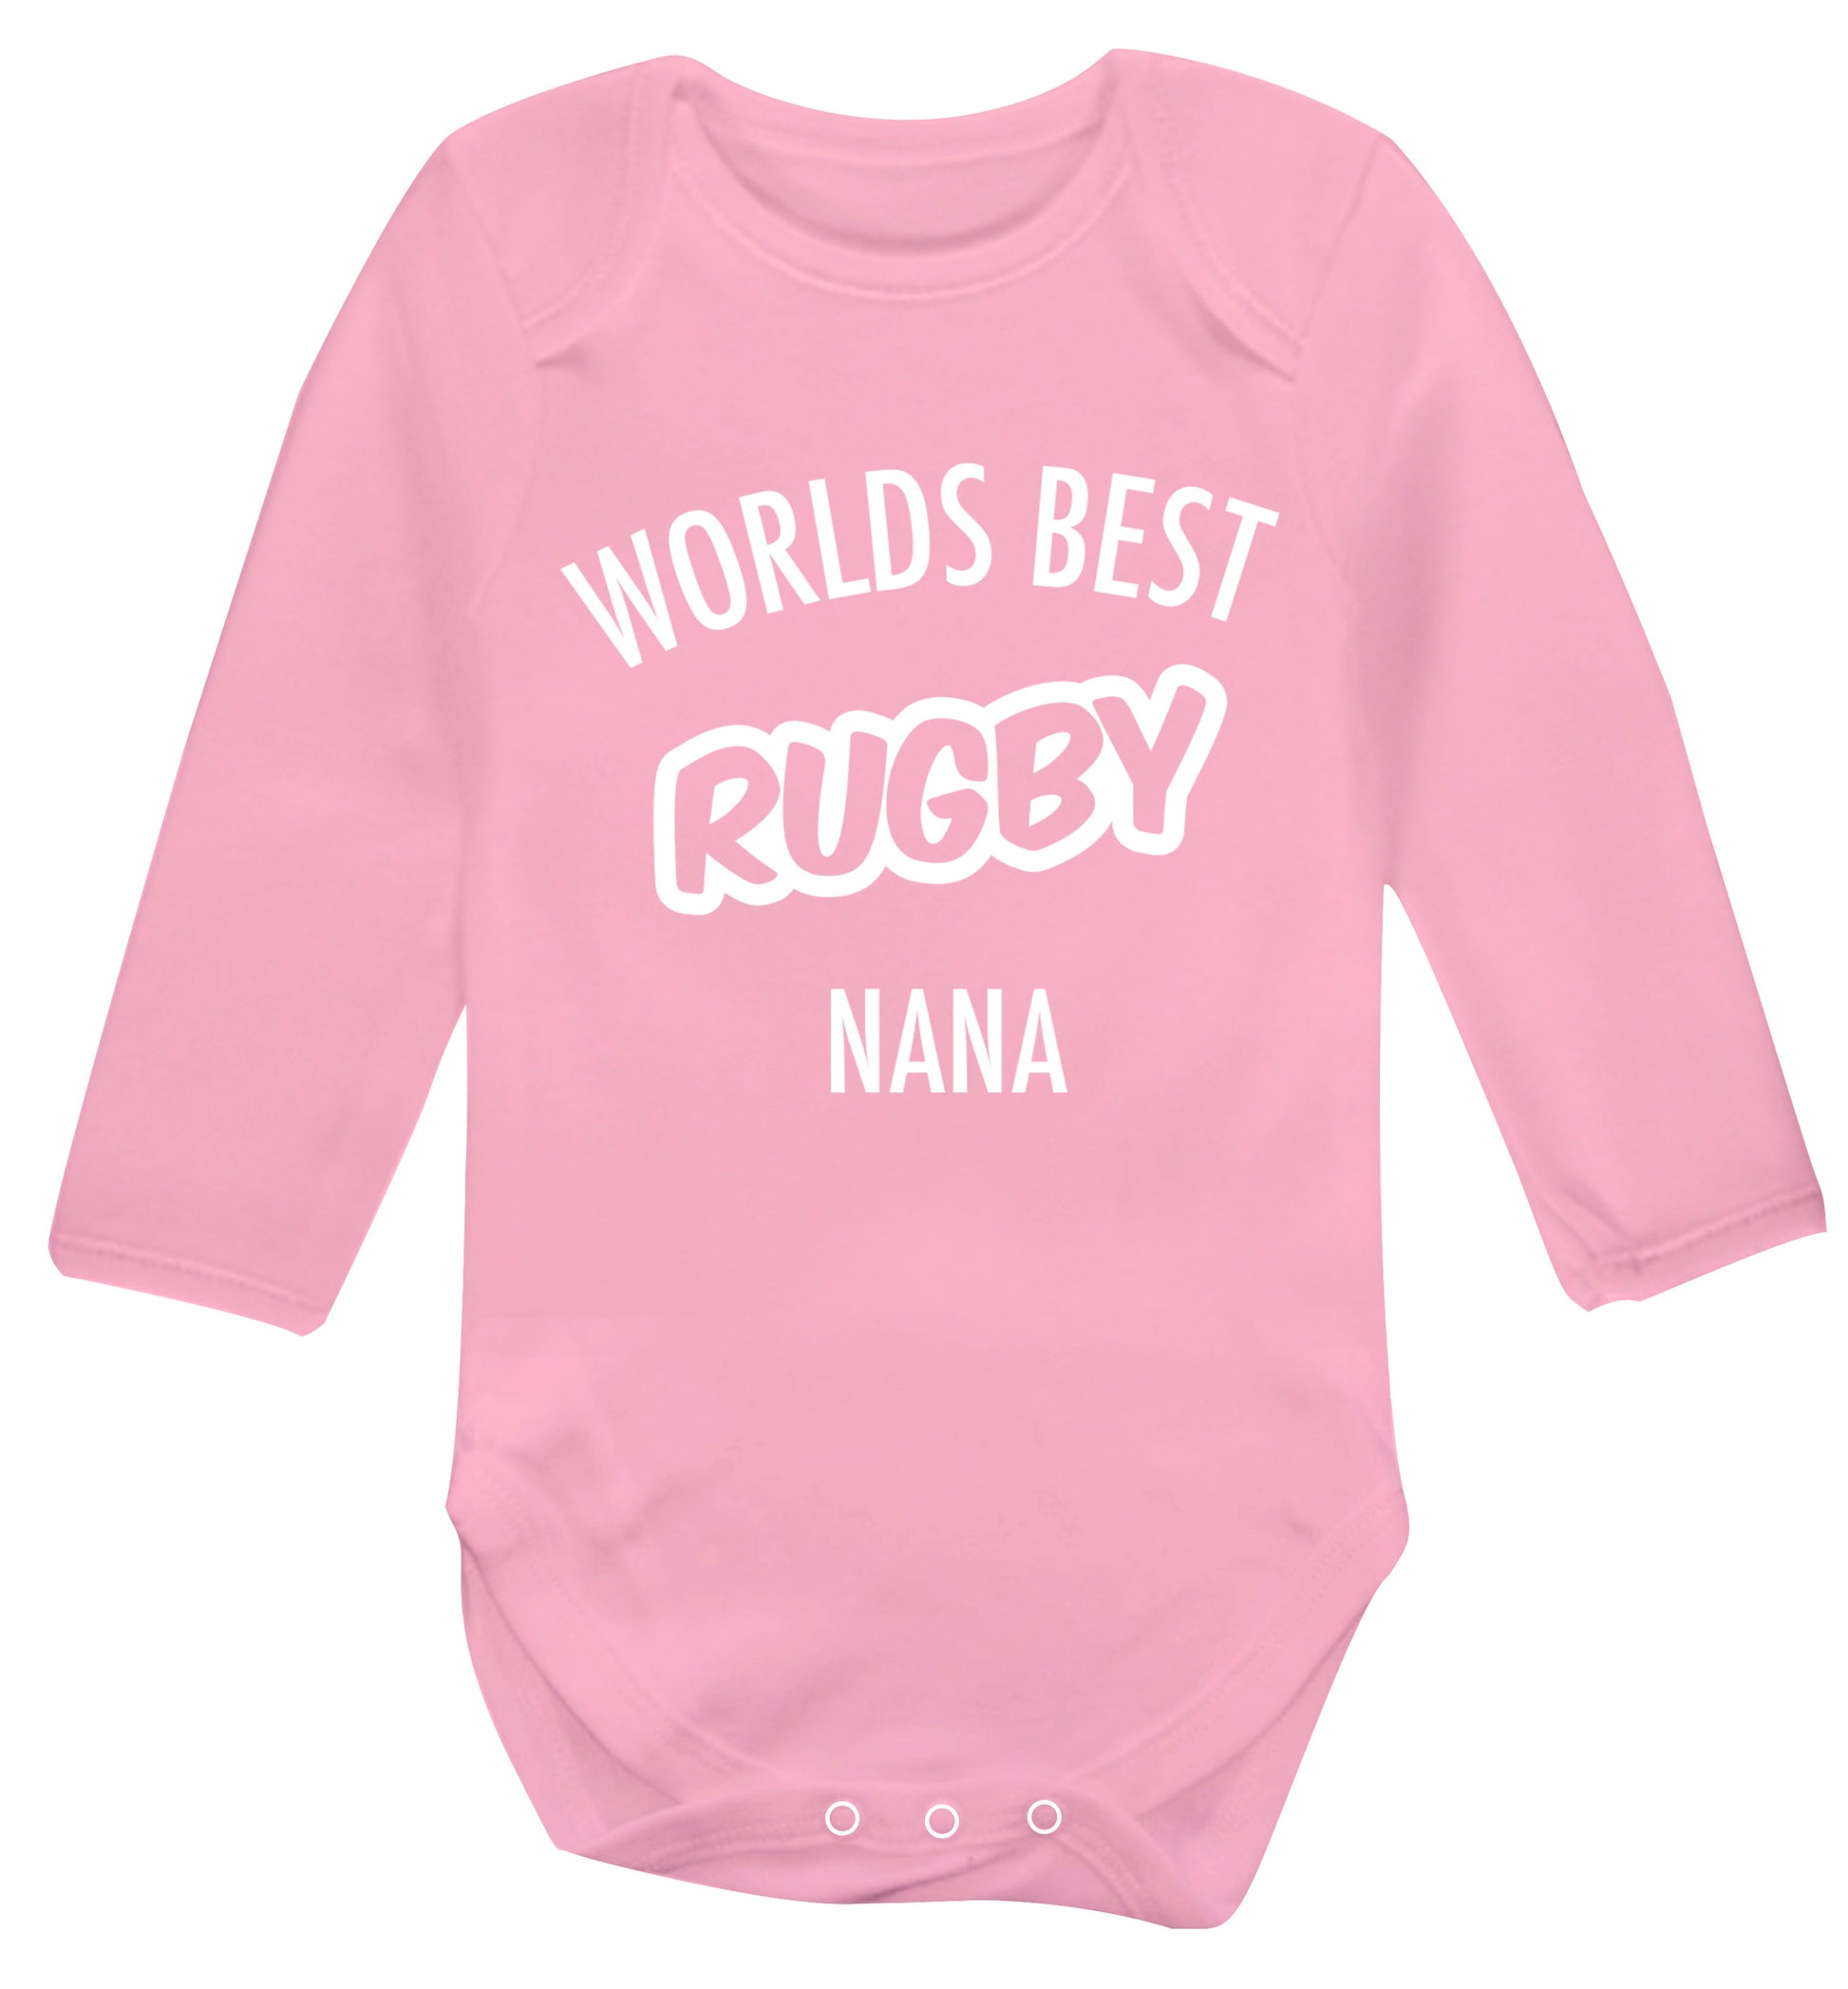 Worlds Best Rugby Grandma Baby Vest long sleeved pale pink 6-12 months